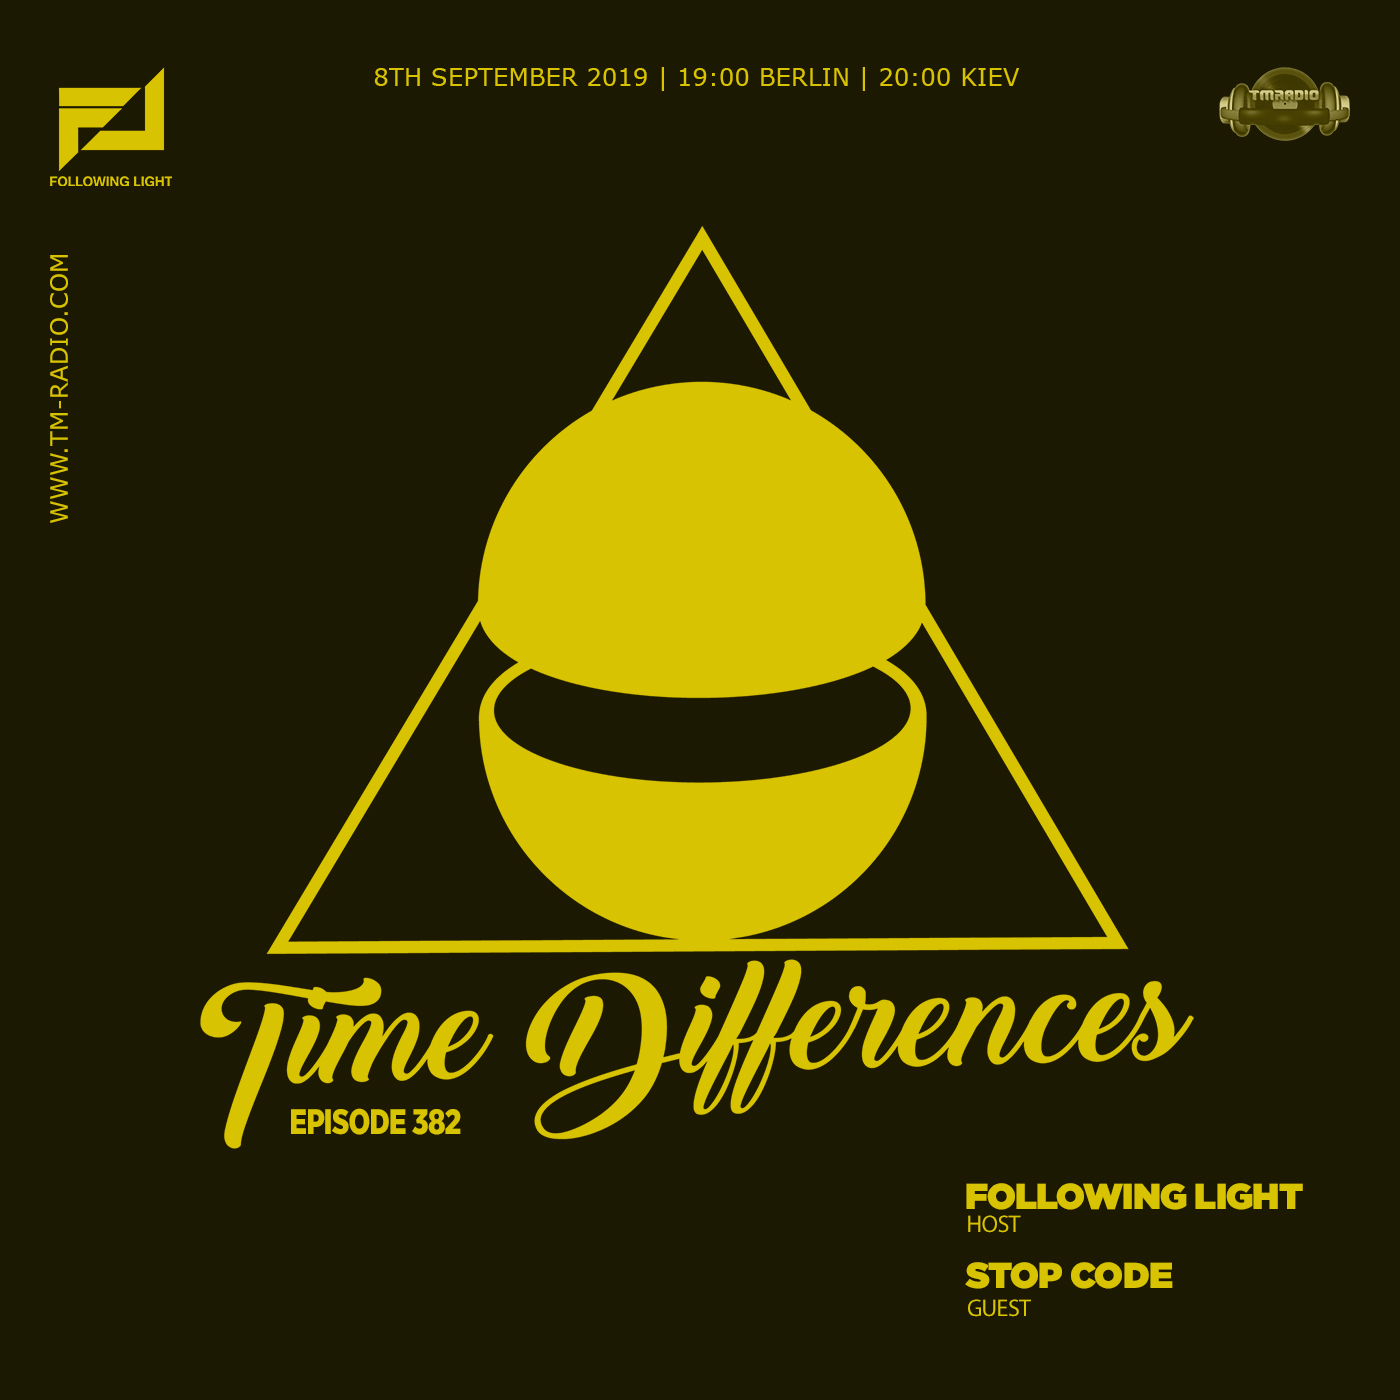 Time Differences :: Episode 382, with host Following Light and guest Stop Code (aired on September 8th, 2019) banner logo